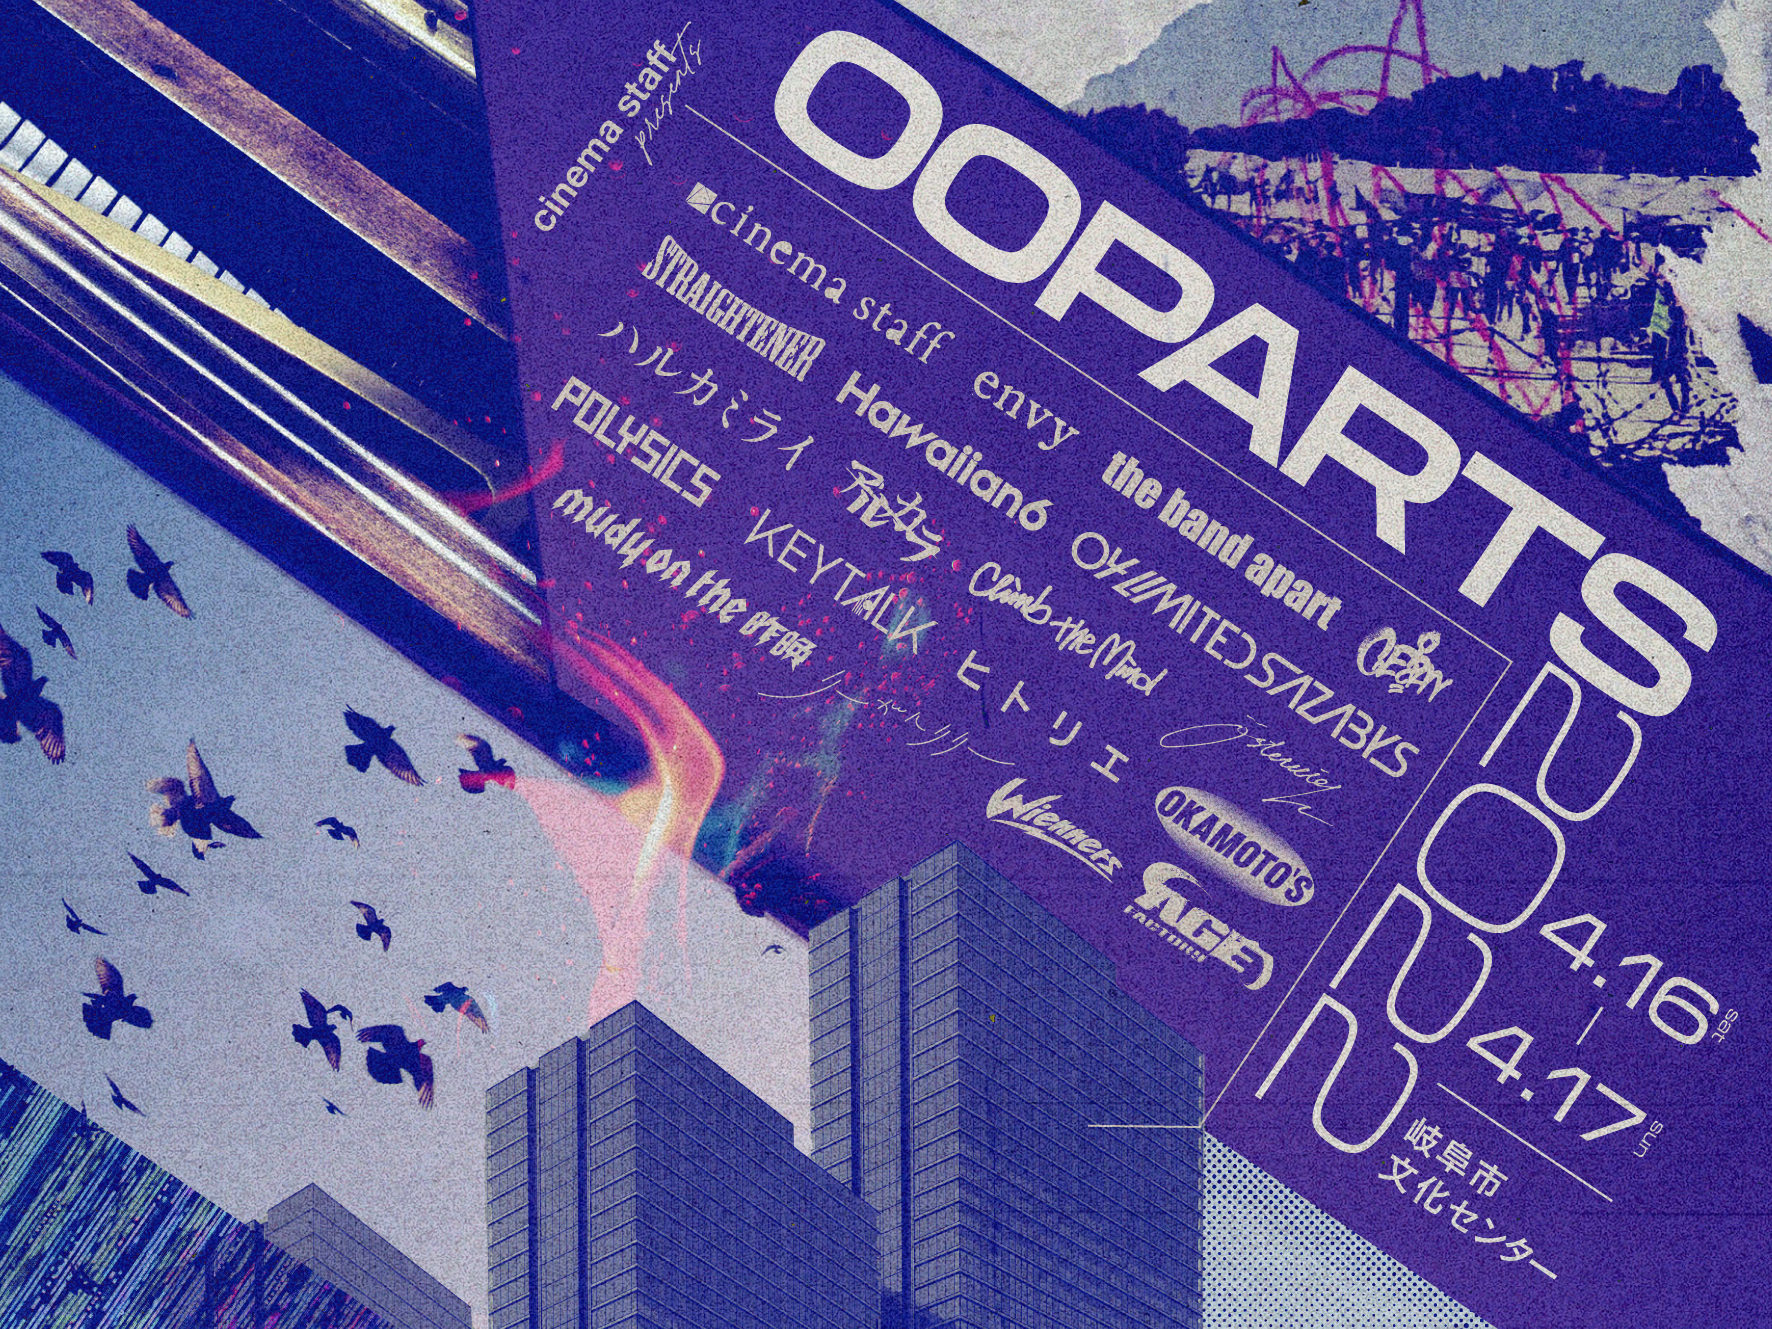 "OOPARTS 2022" 出演決定！